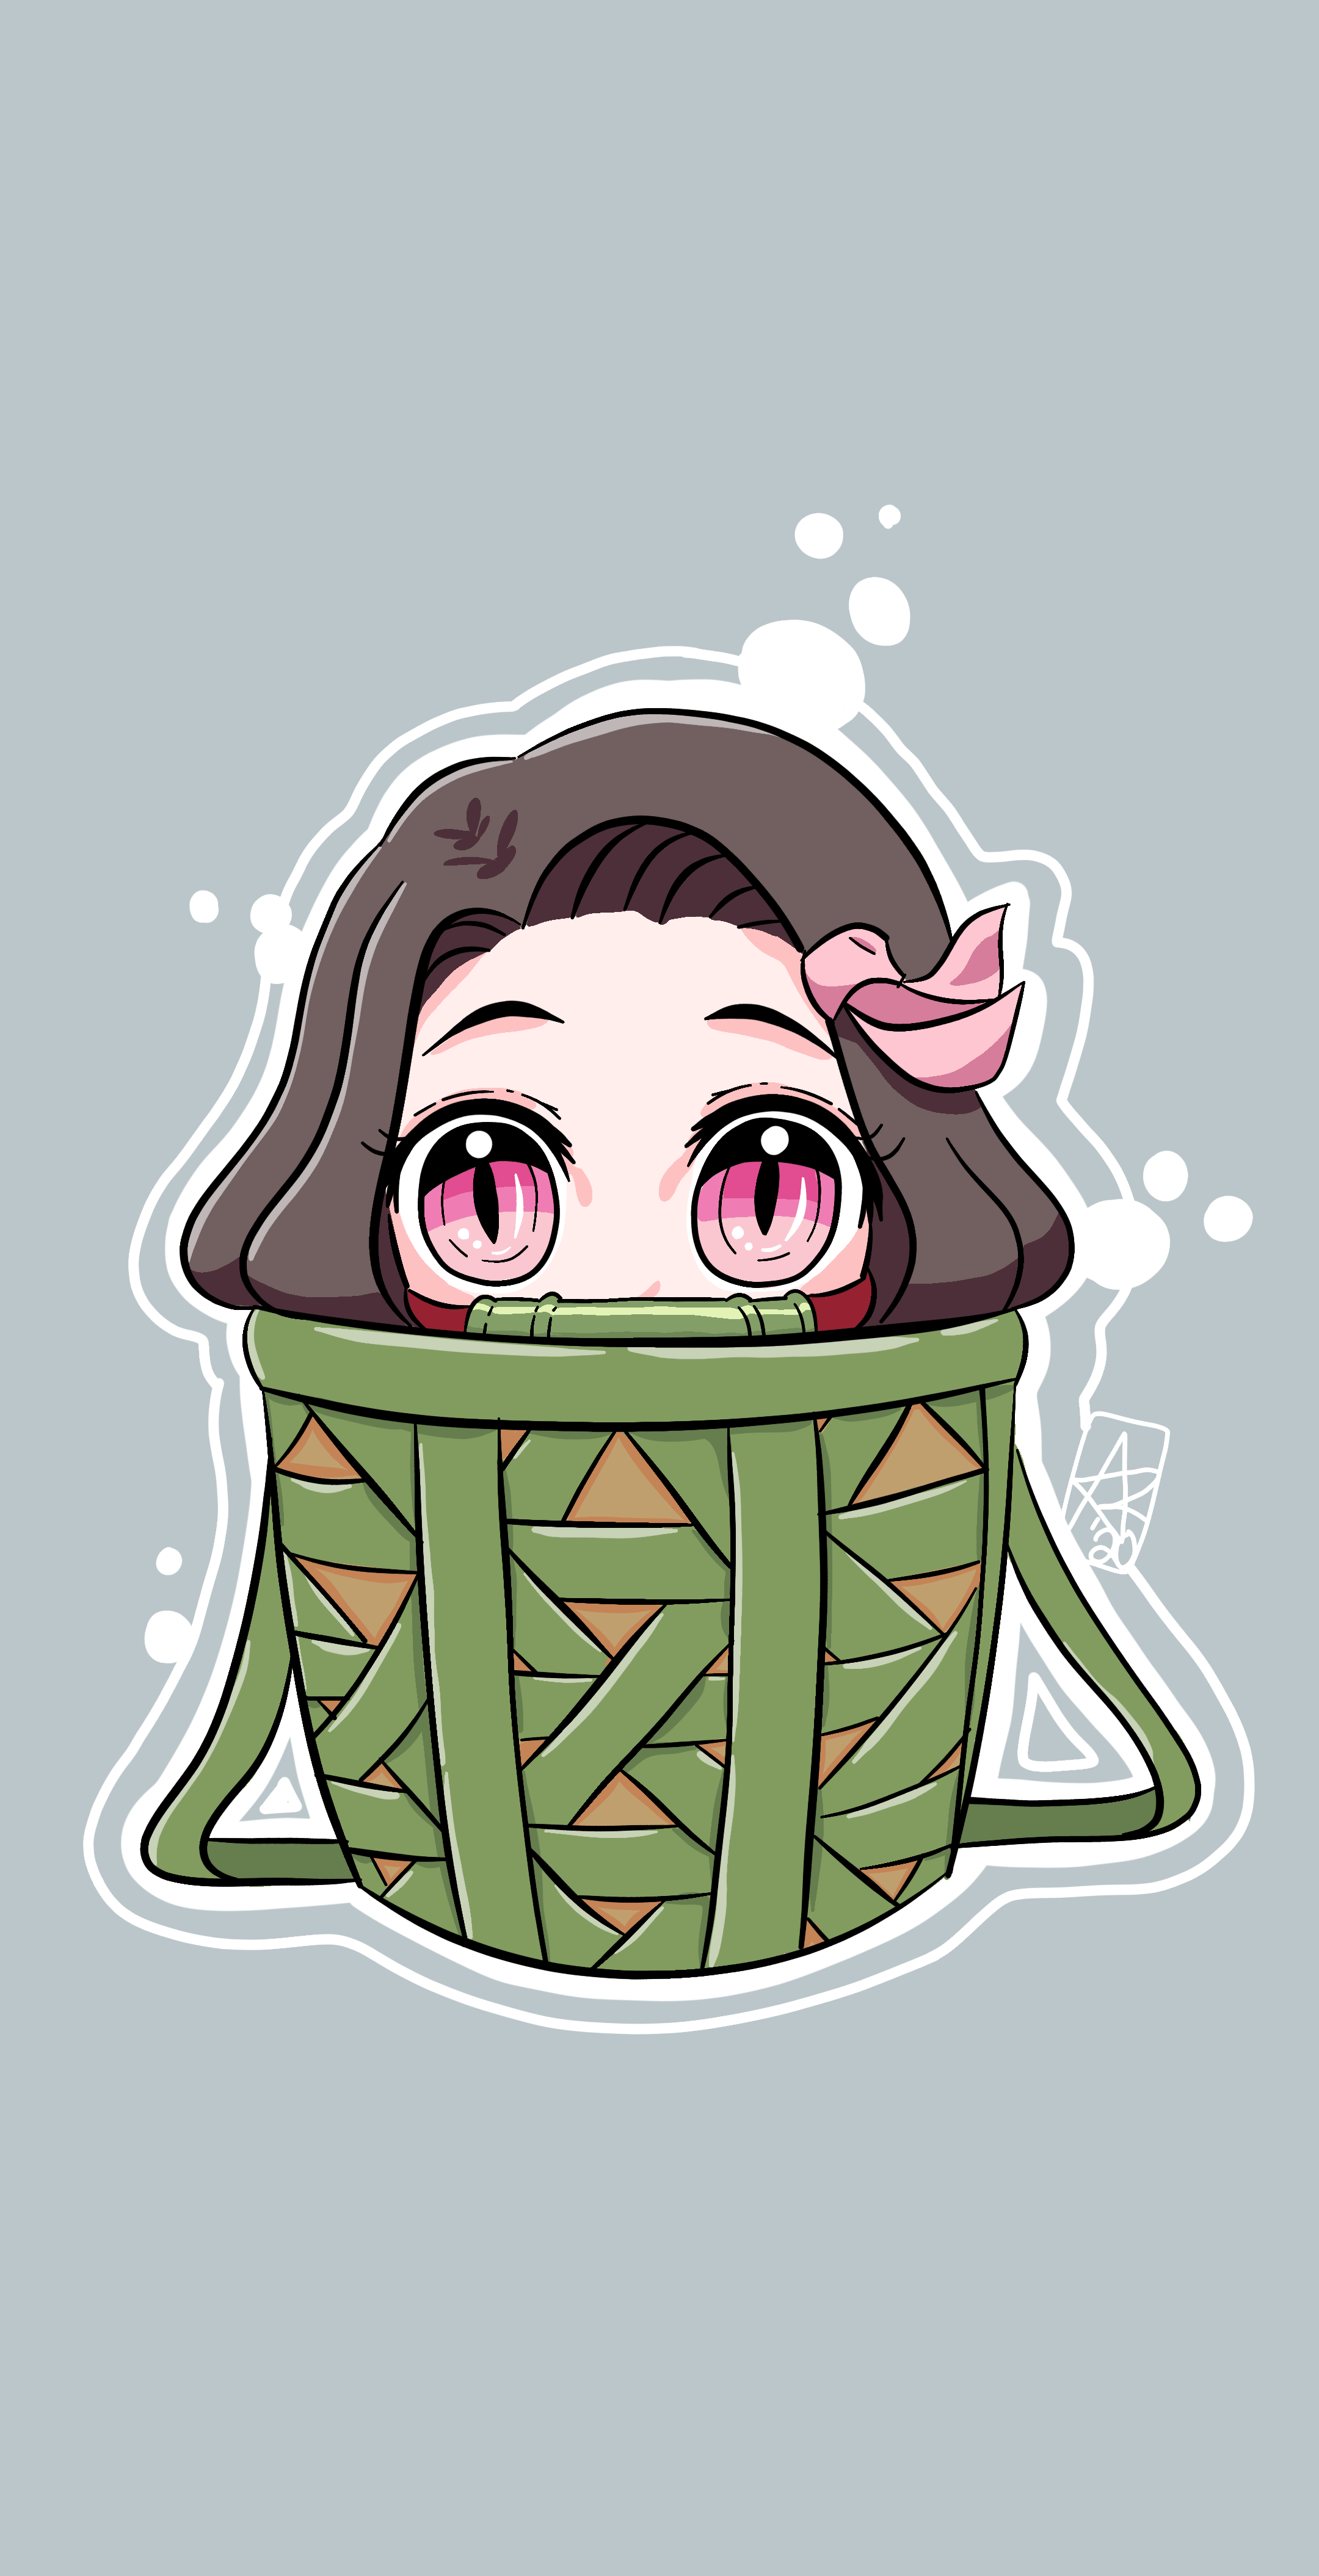 Anime girl with pink eyes in a green basket - Nezuko